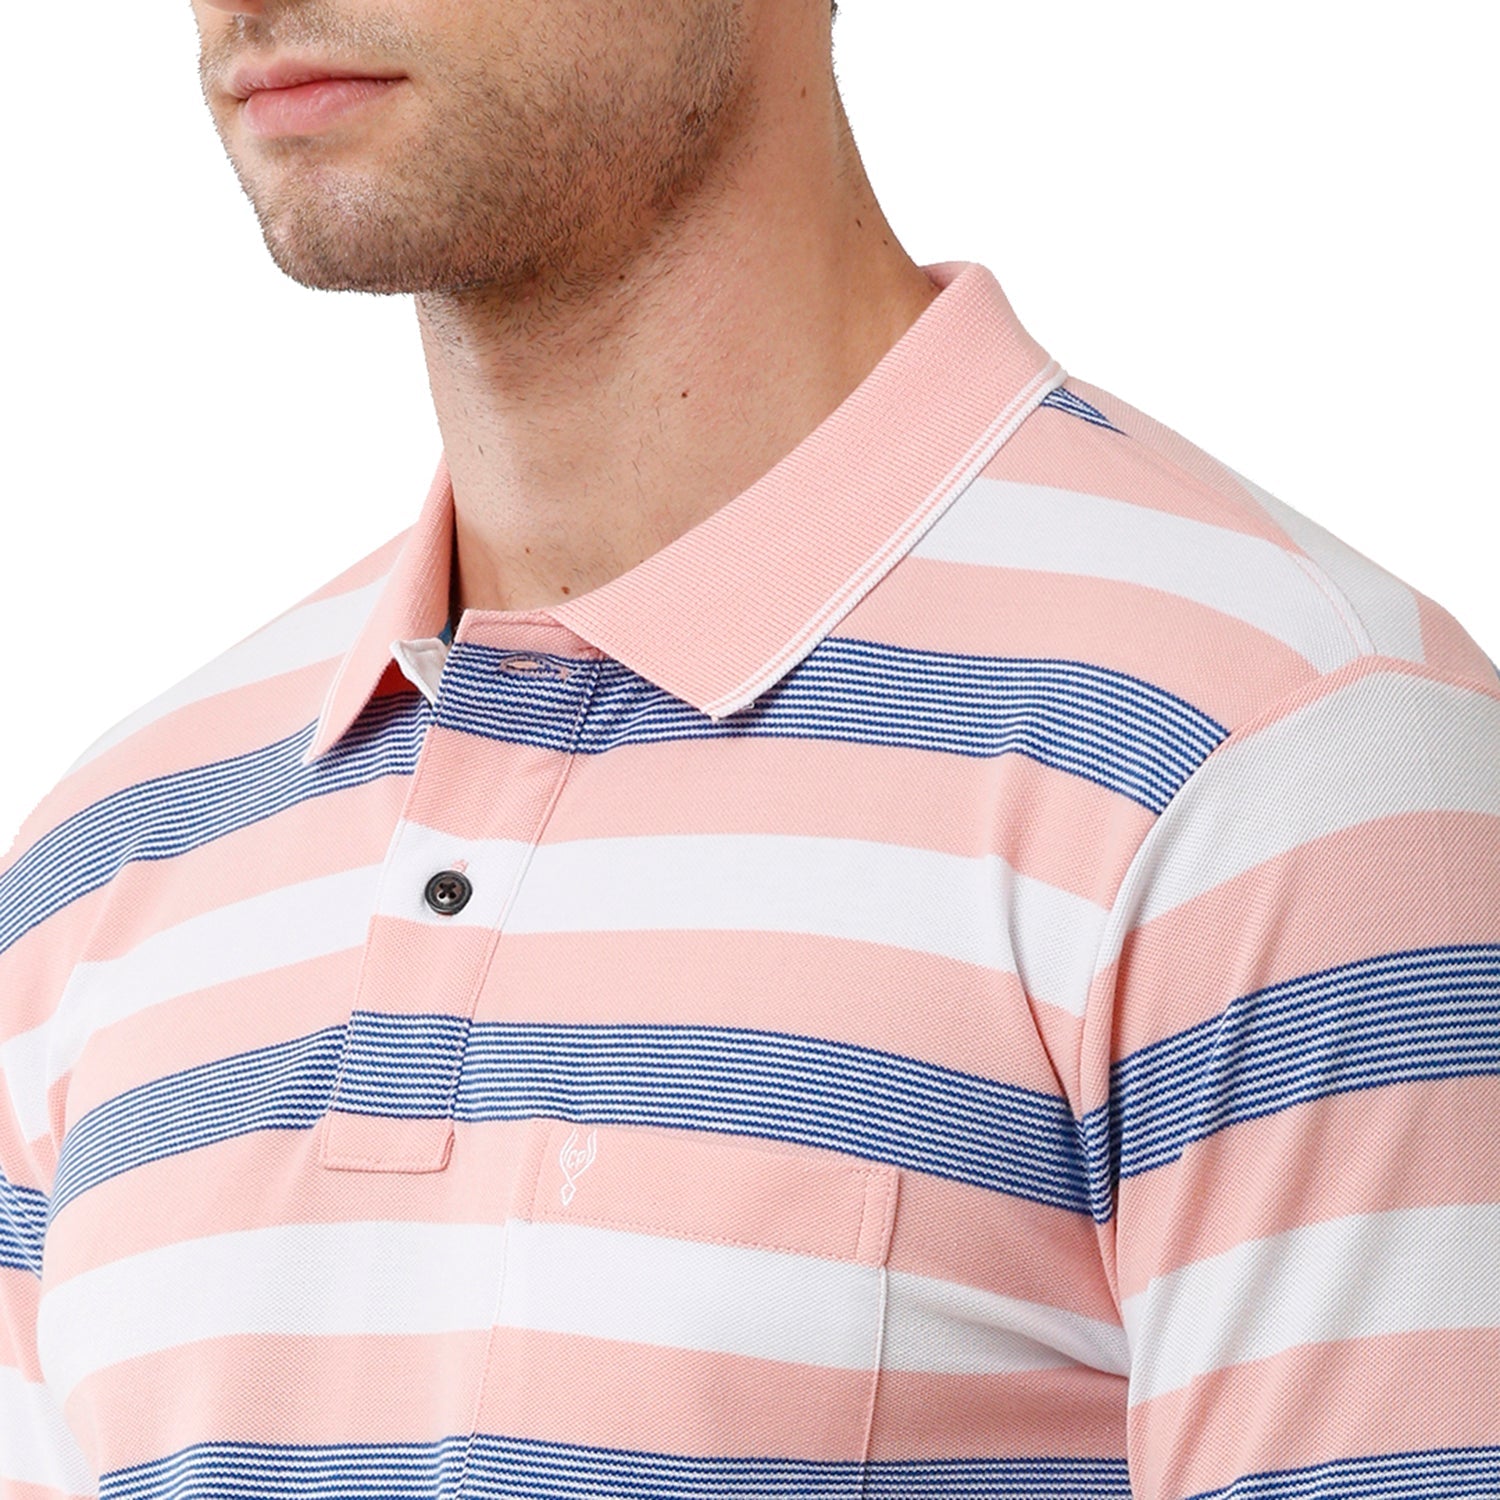 Classic Polo Cotton Striped Pink & Blue Slim Fit Polo Neck T-Shirt Adore - 163 B T-shirt Classic Polo 